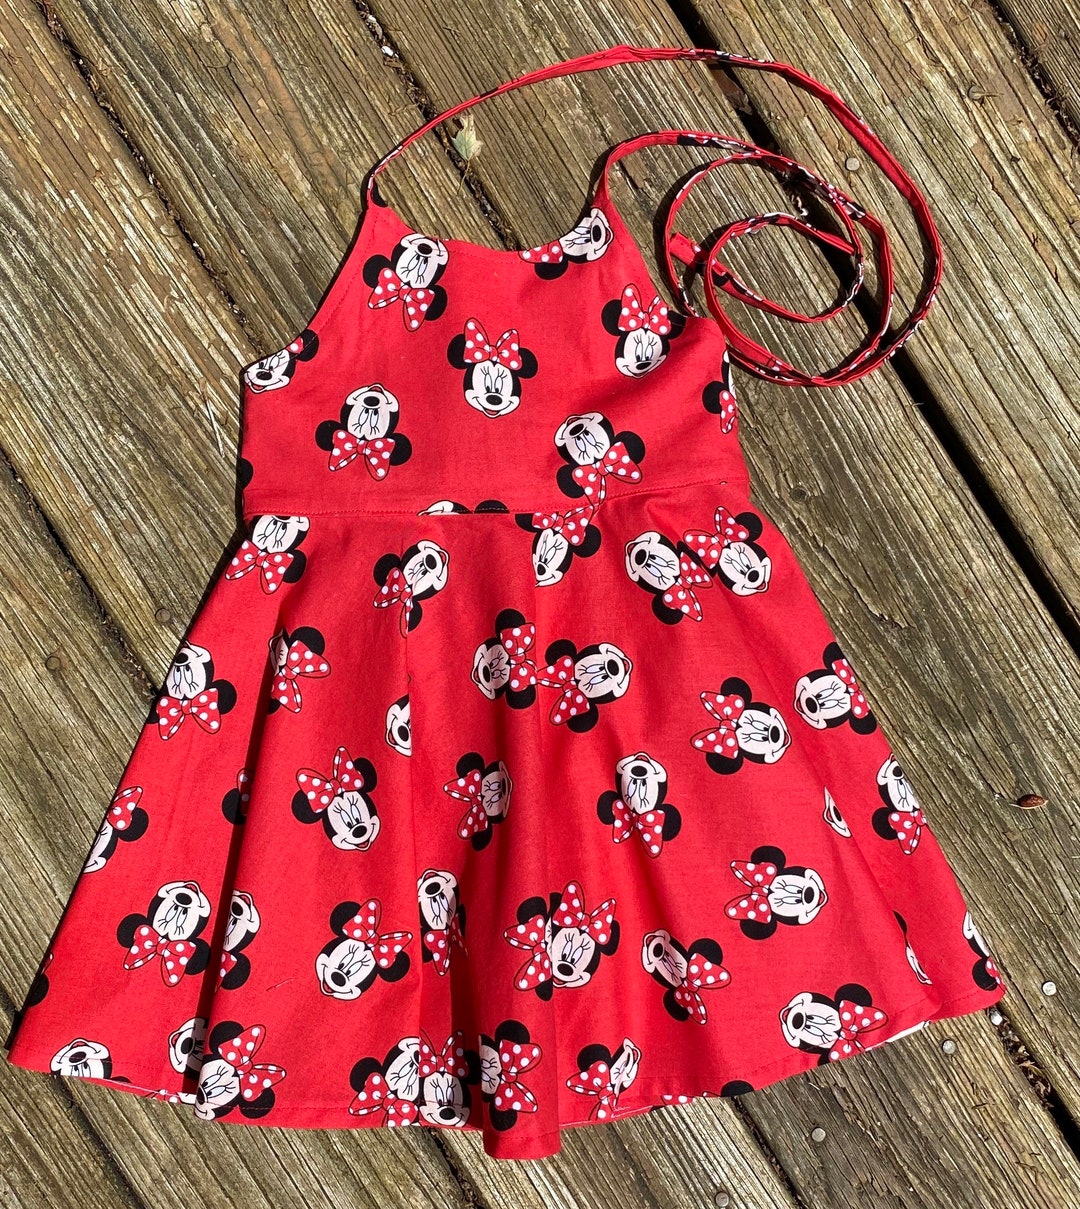 Minnie Mouse Dress Minnie Mouse Sundress Minnie Mouse - Etsy